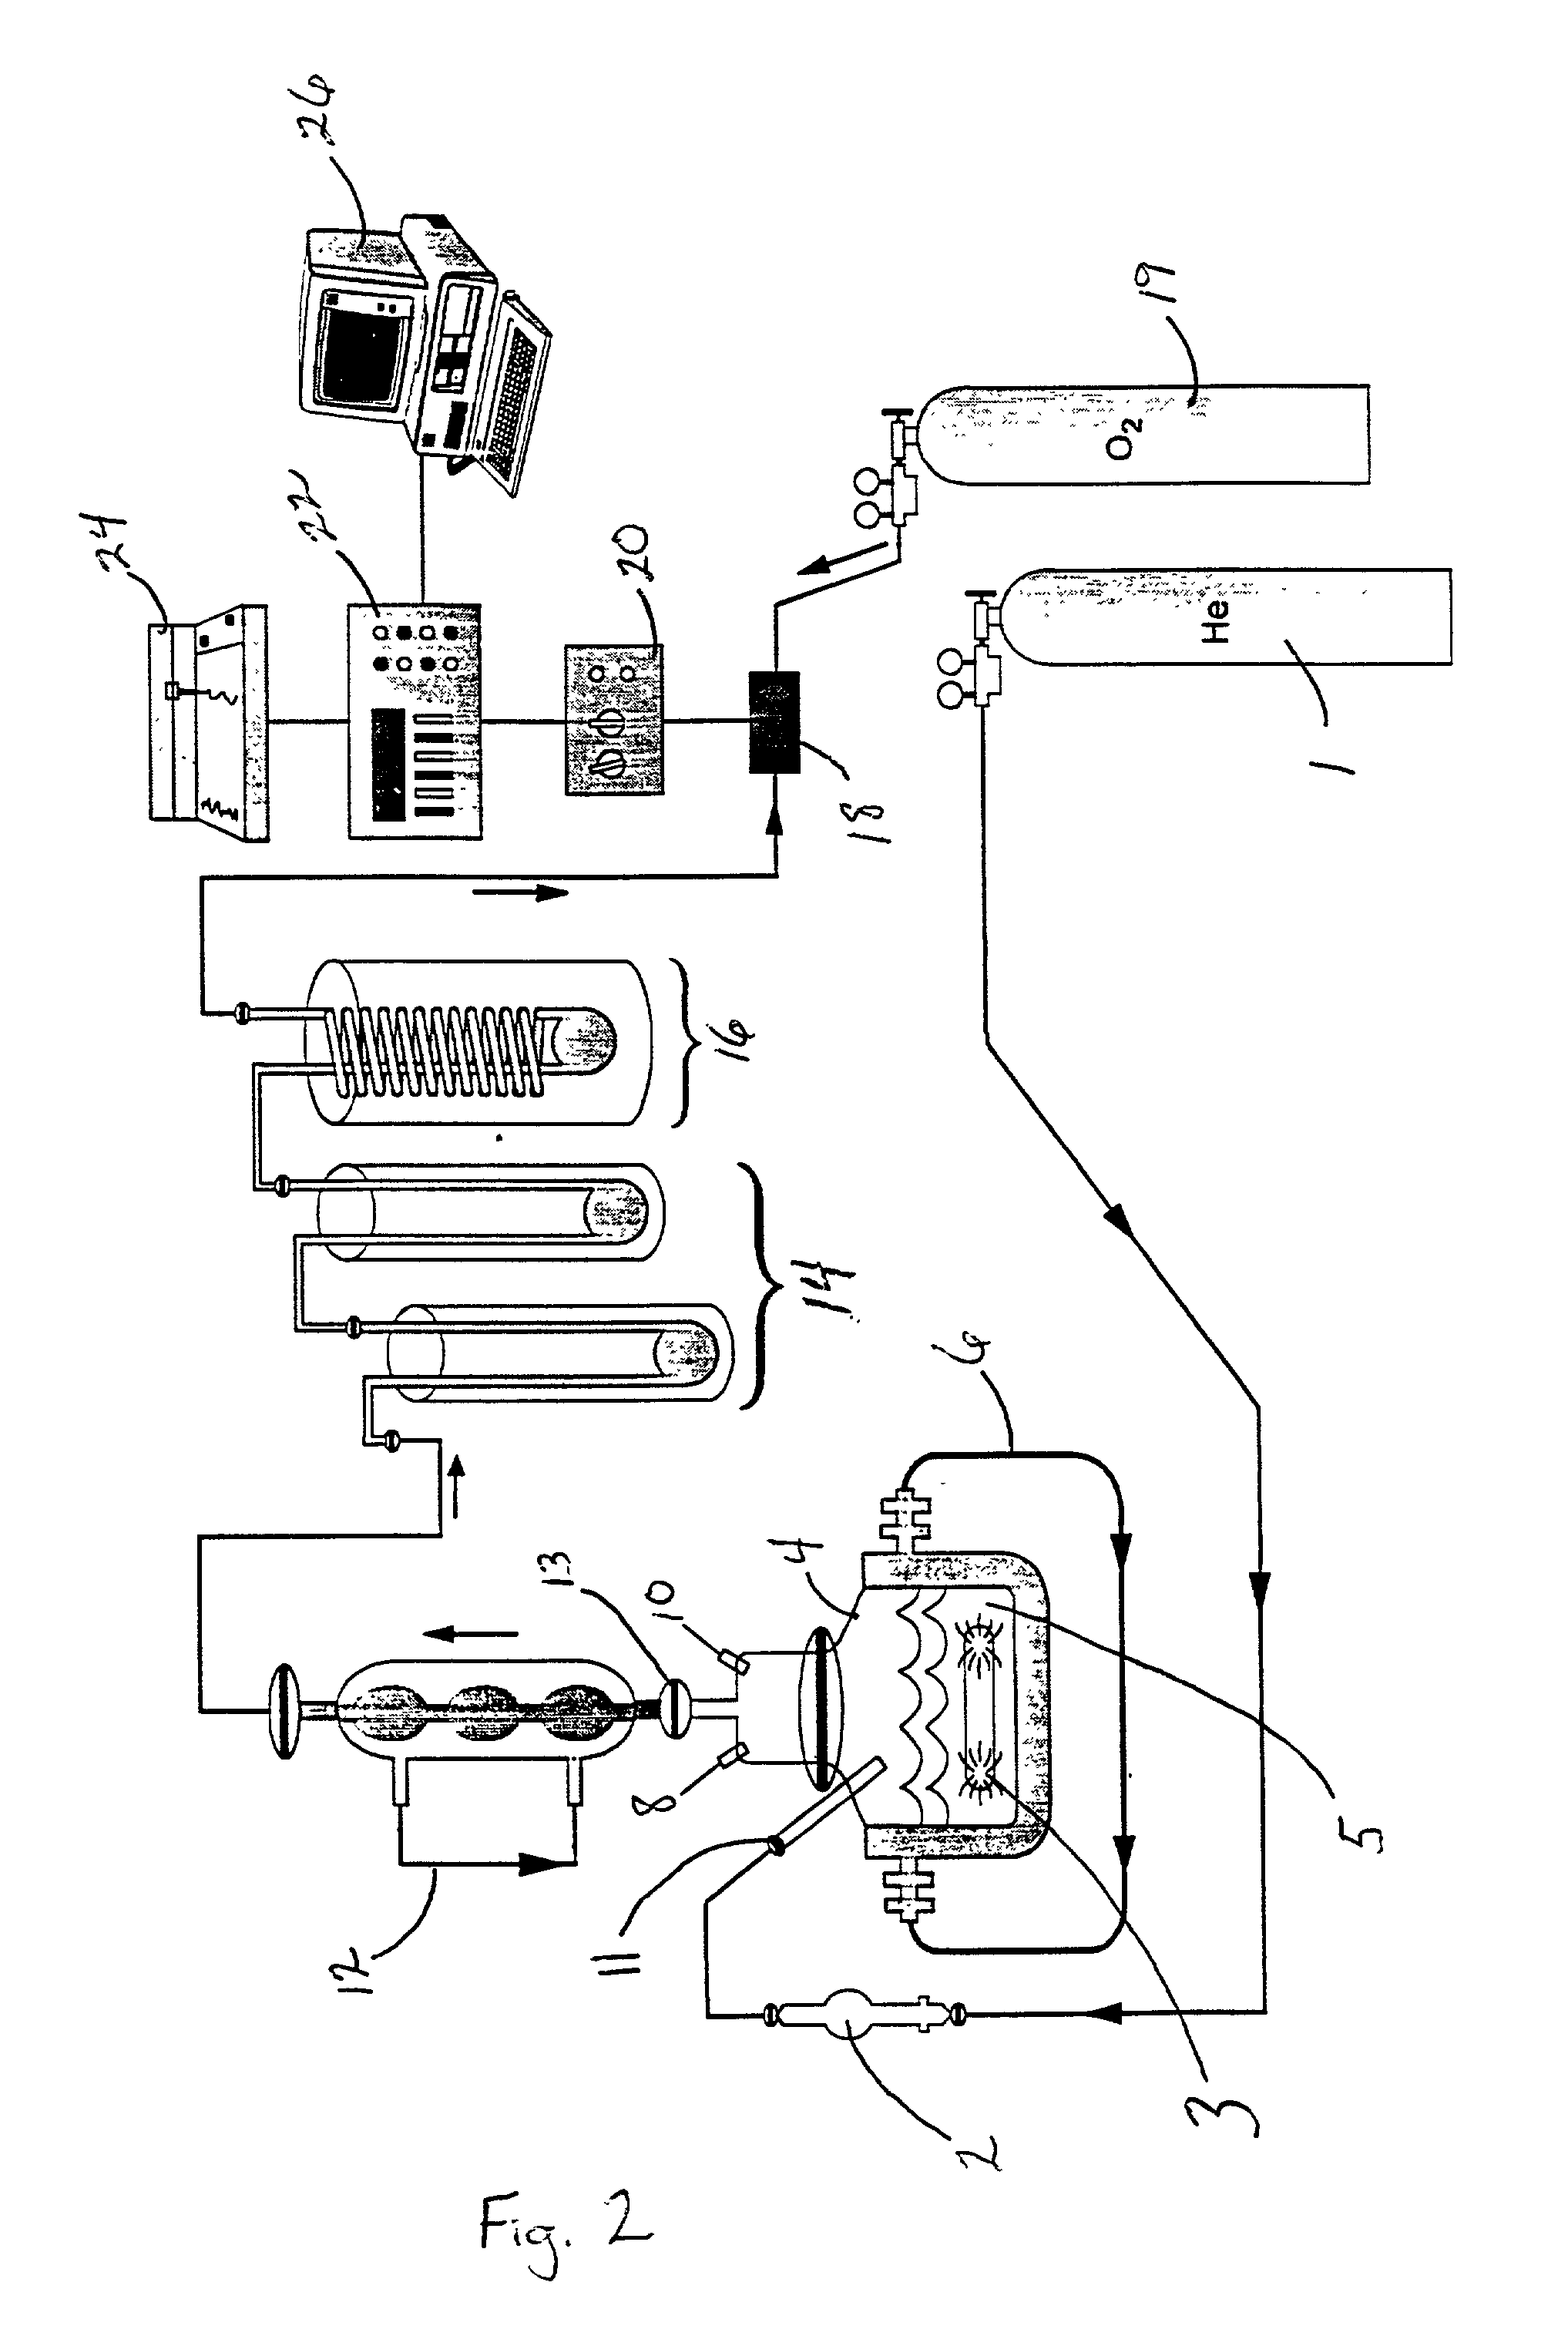 Hydrogen-powered energy-producing device and system for continous production of hydrogen